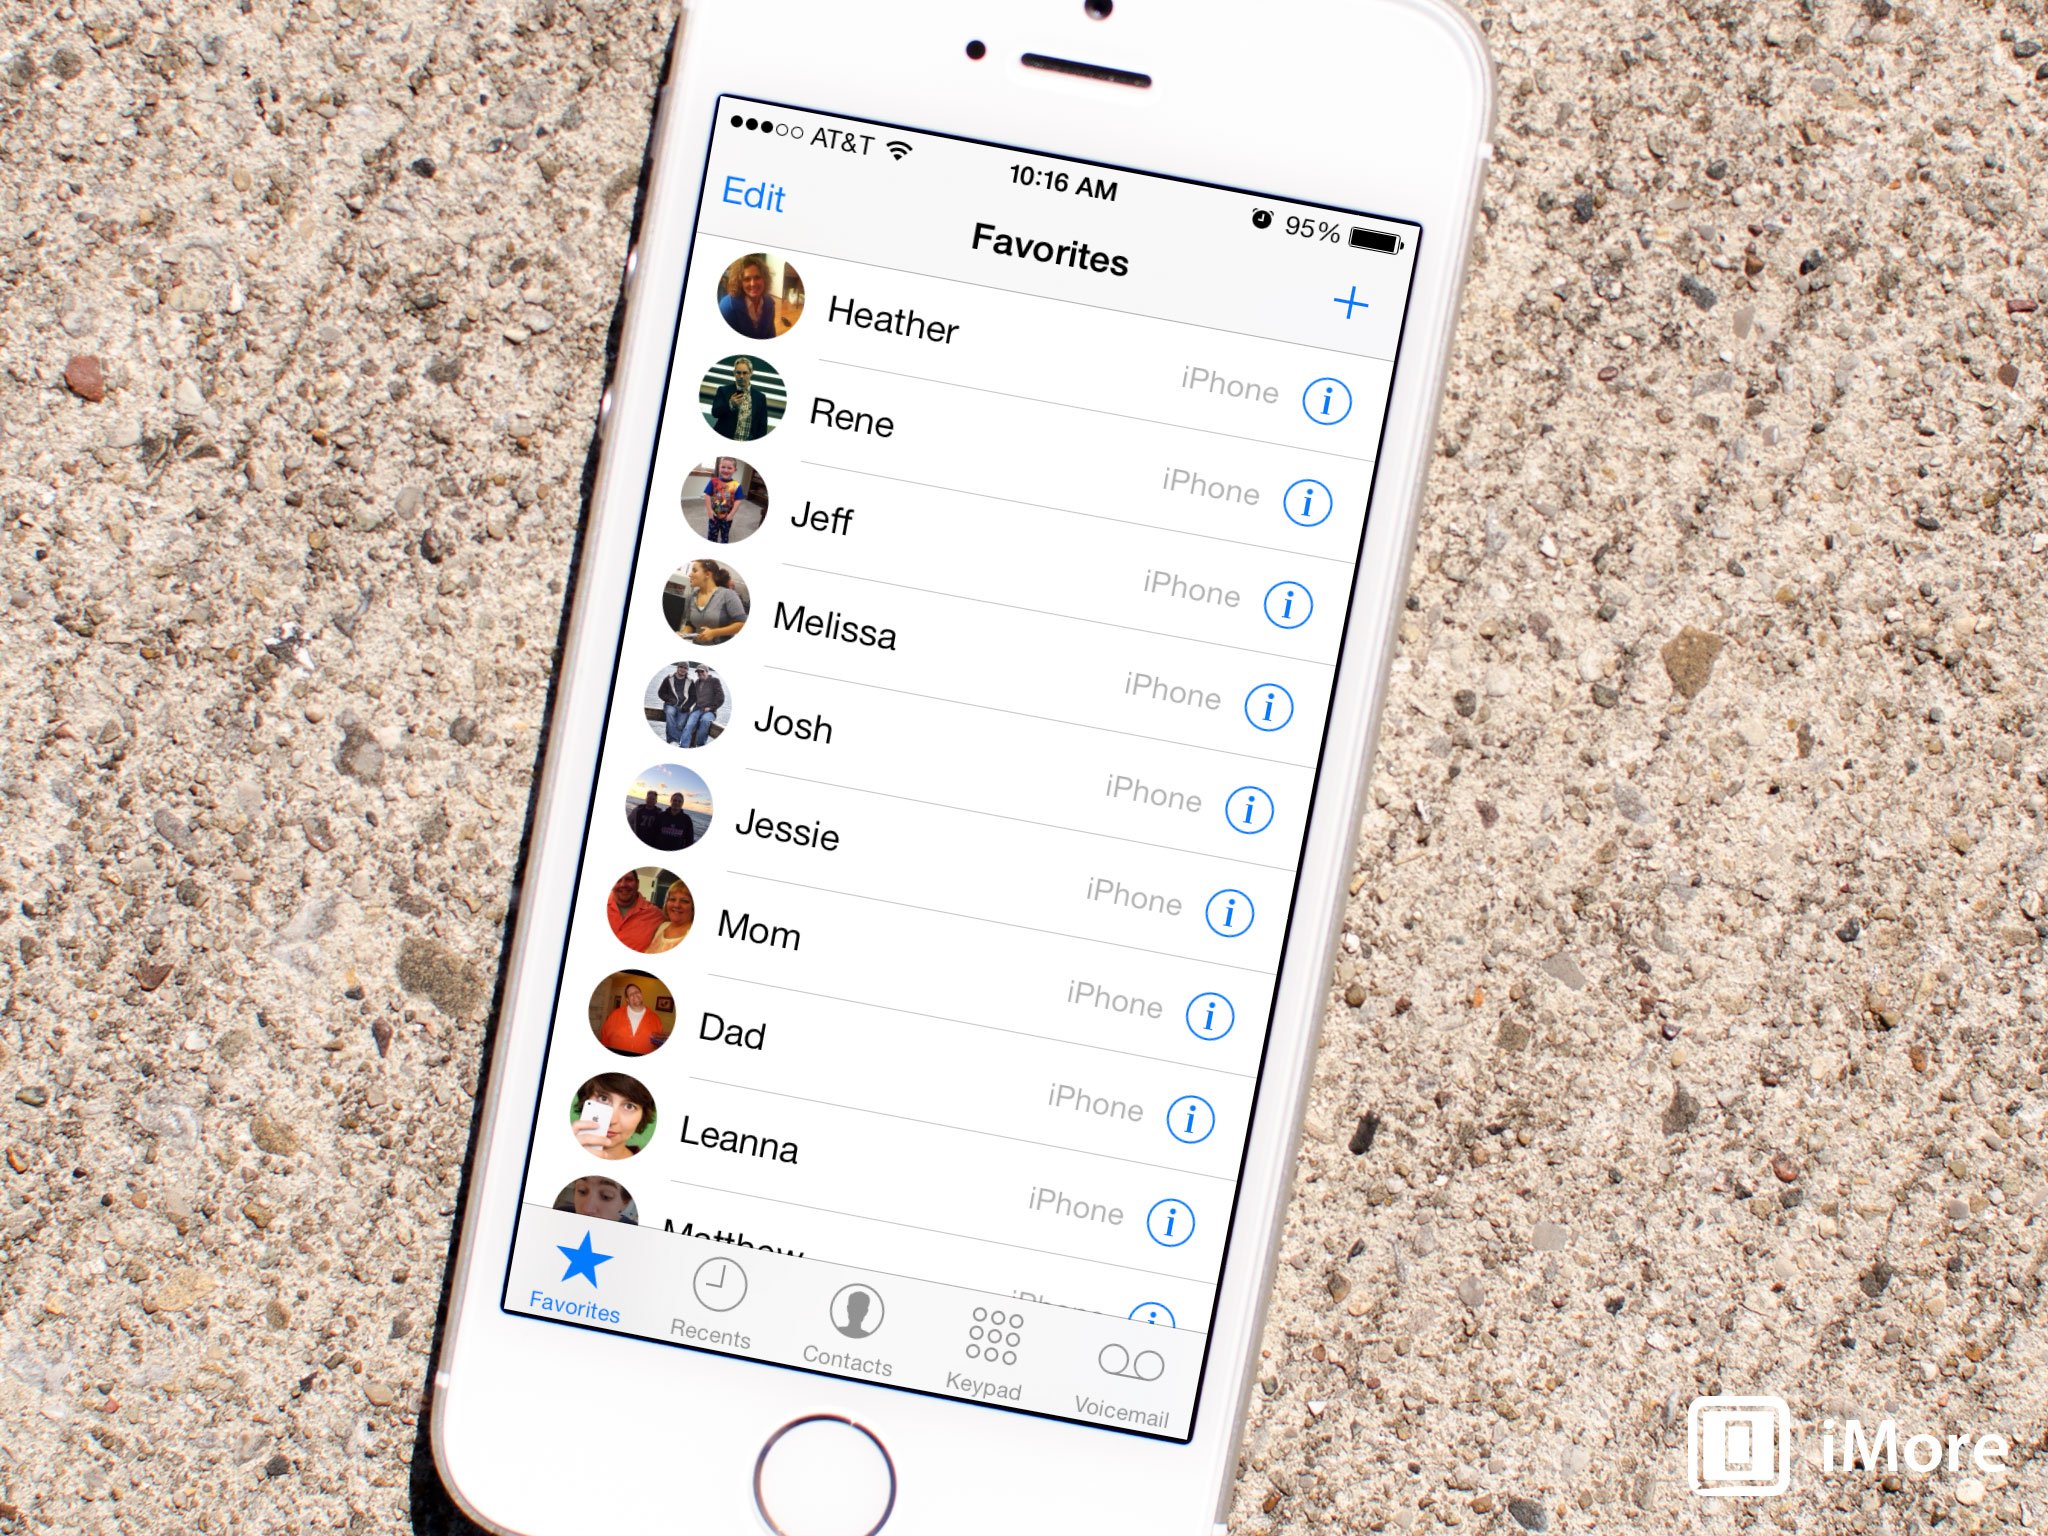 How to disable contact photos for favorites in the iOS 7 Phone app